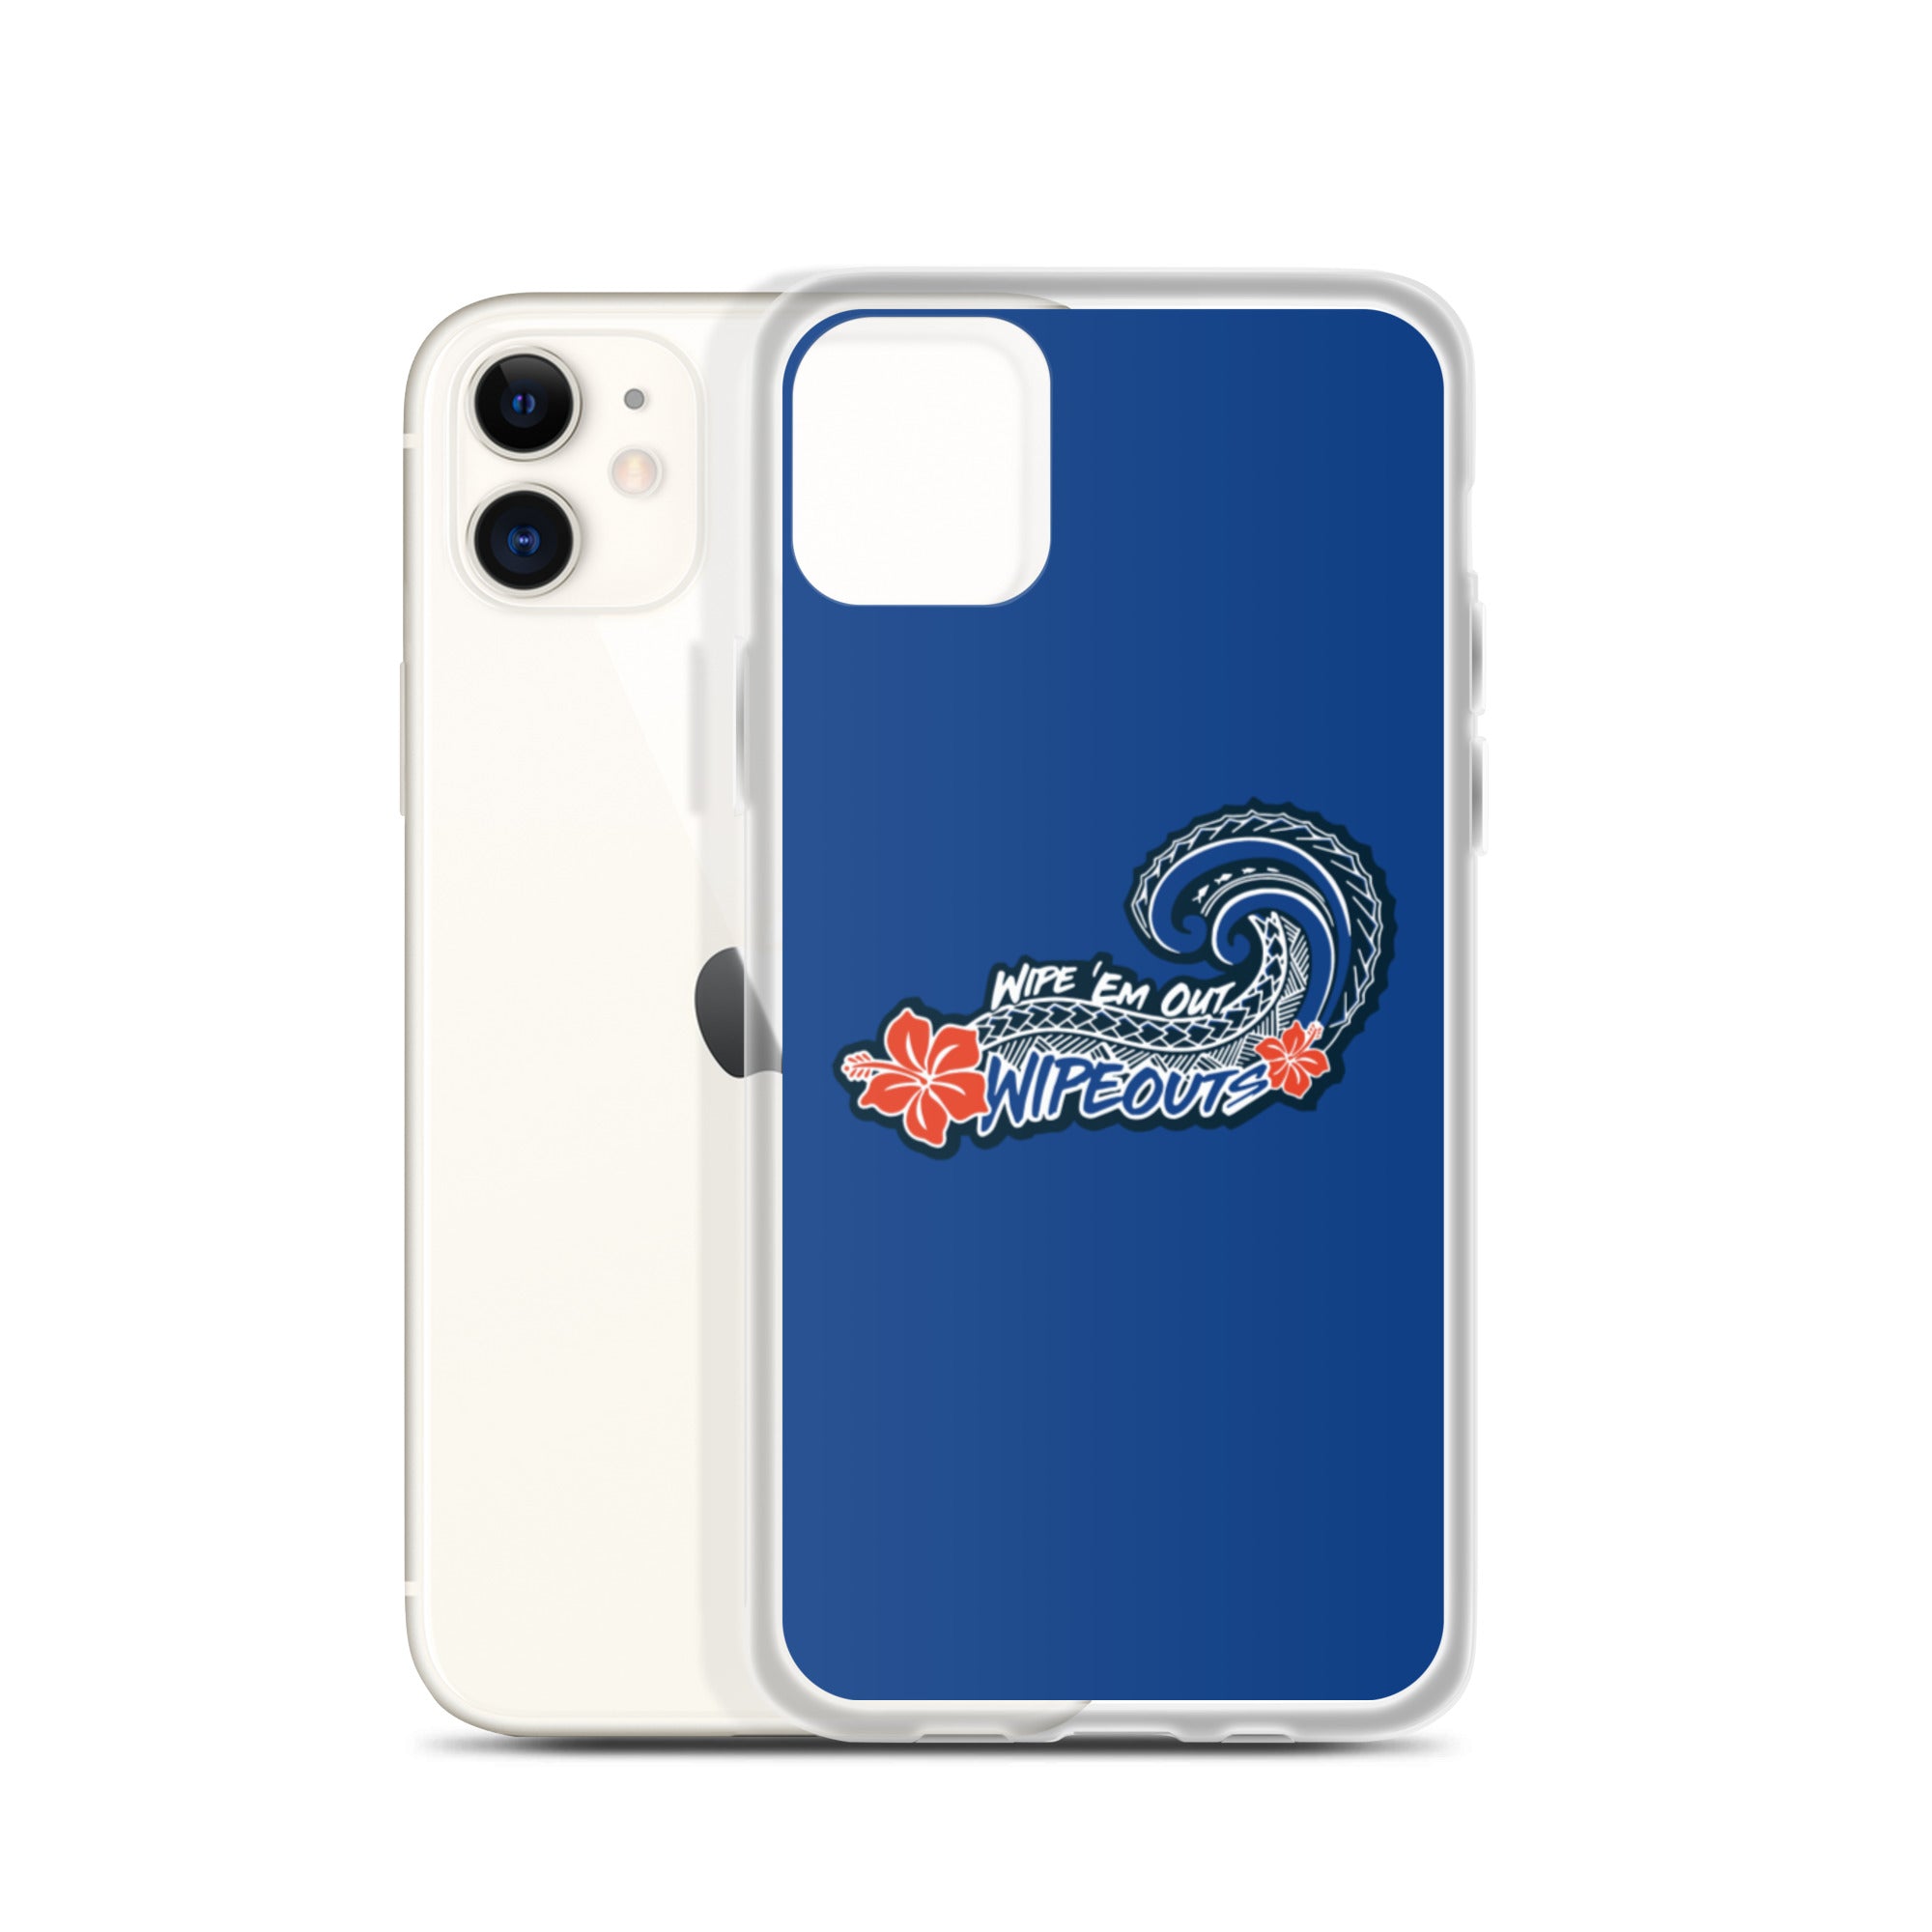 IEW iPhone Case